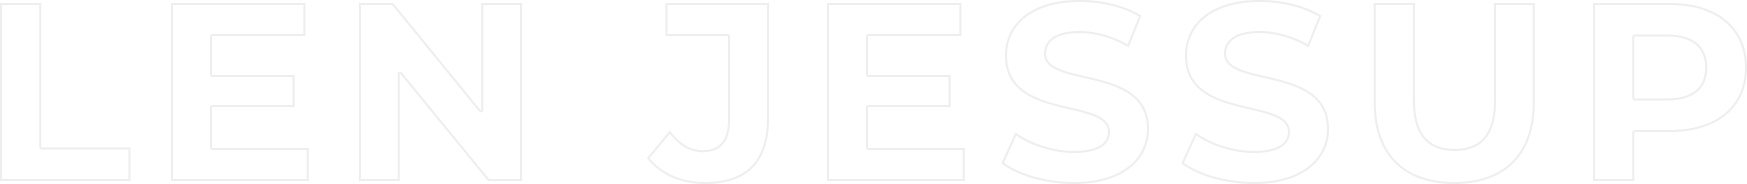 A green and white letter e with the letters e